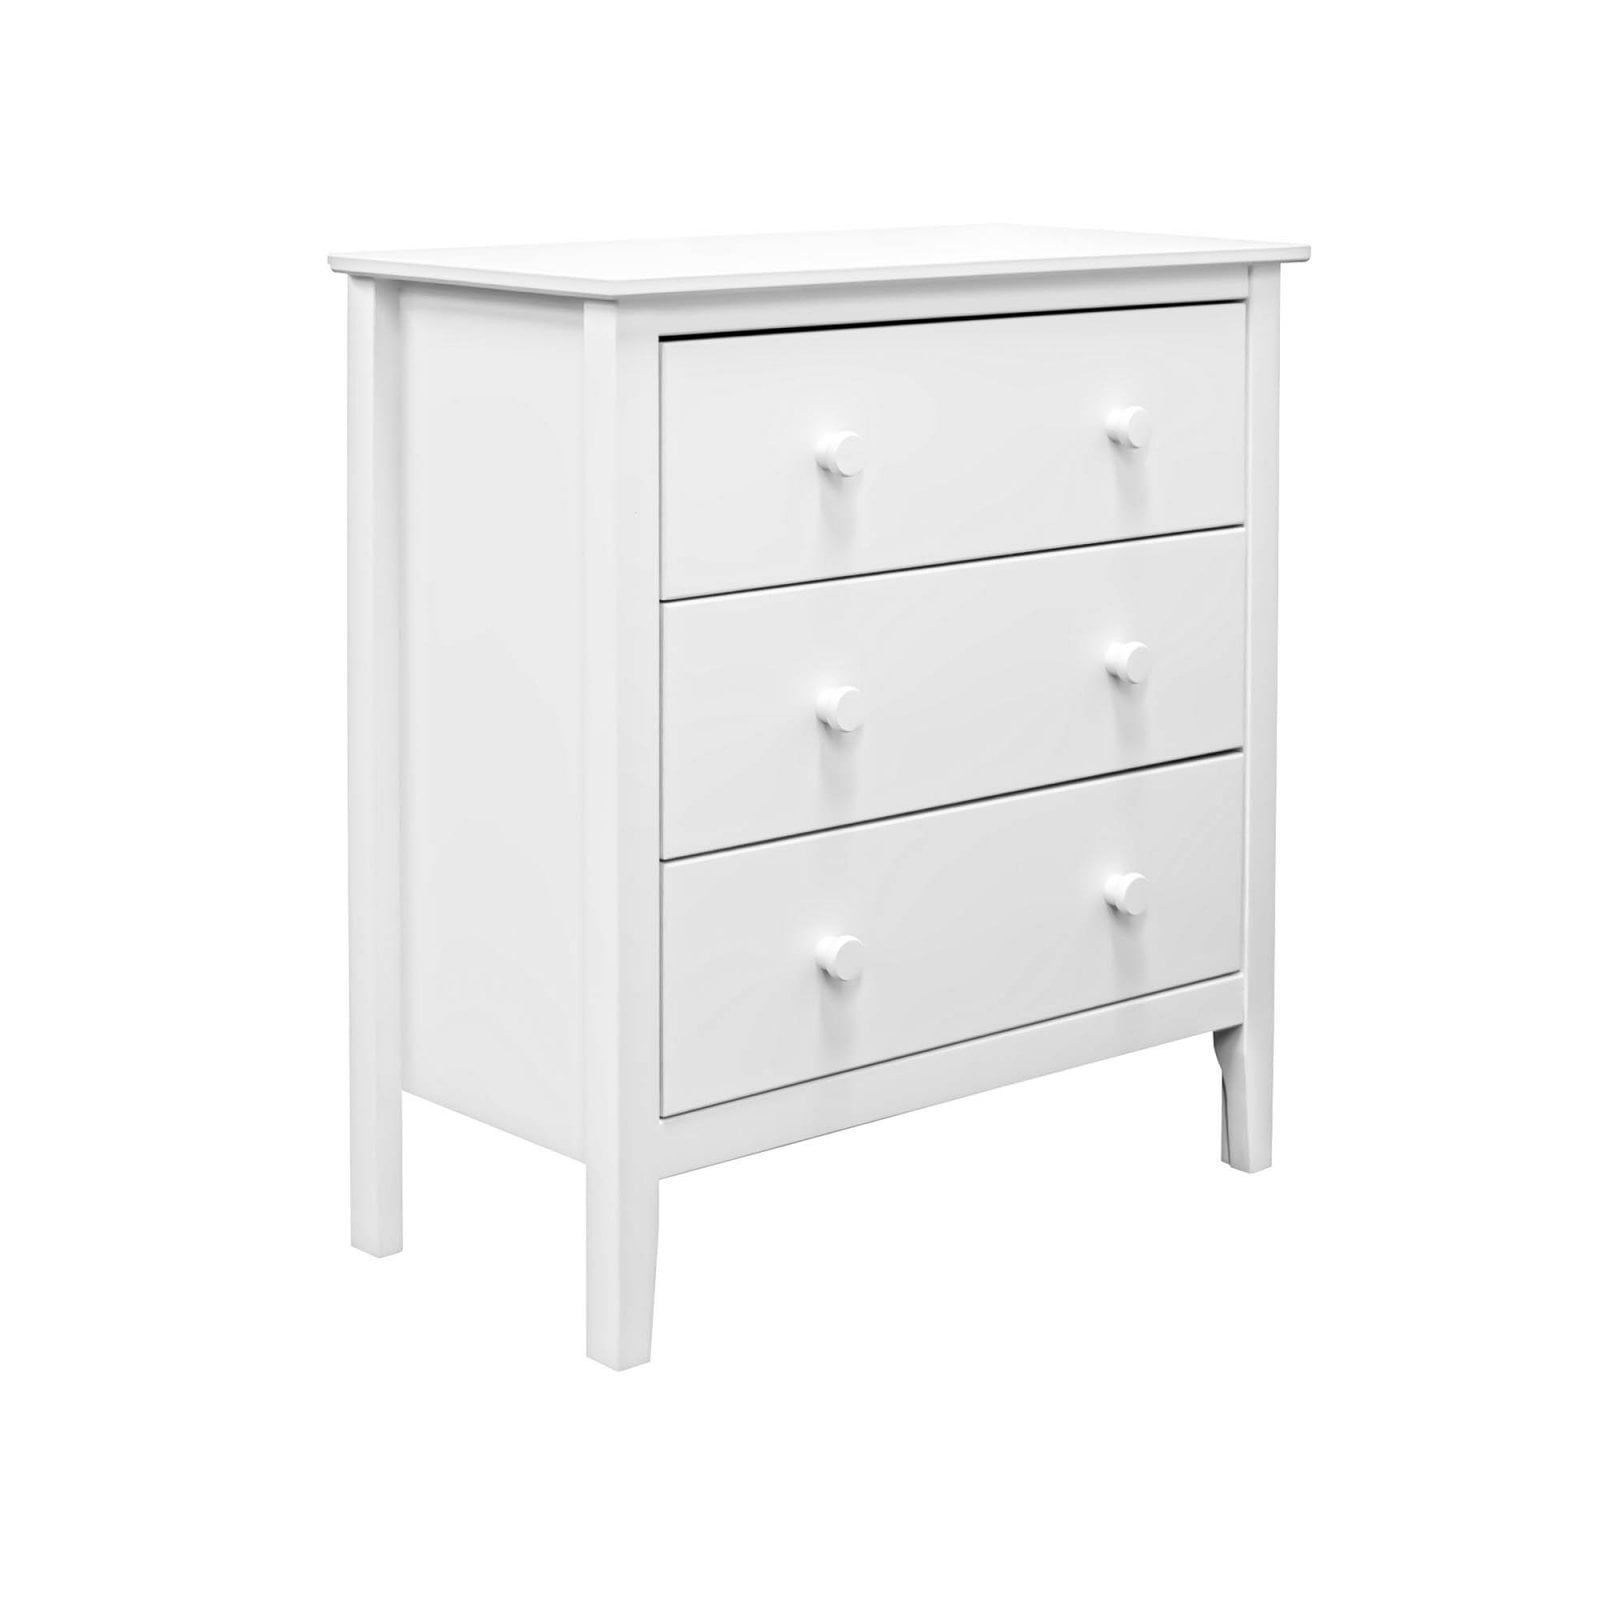 CORONA GREY AND DISTRESSED WAXED PINE 3 DRAWER CHEST *FREE NEXT DAY DELIVERY 